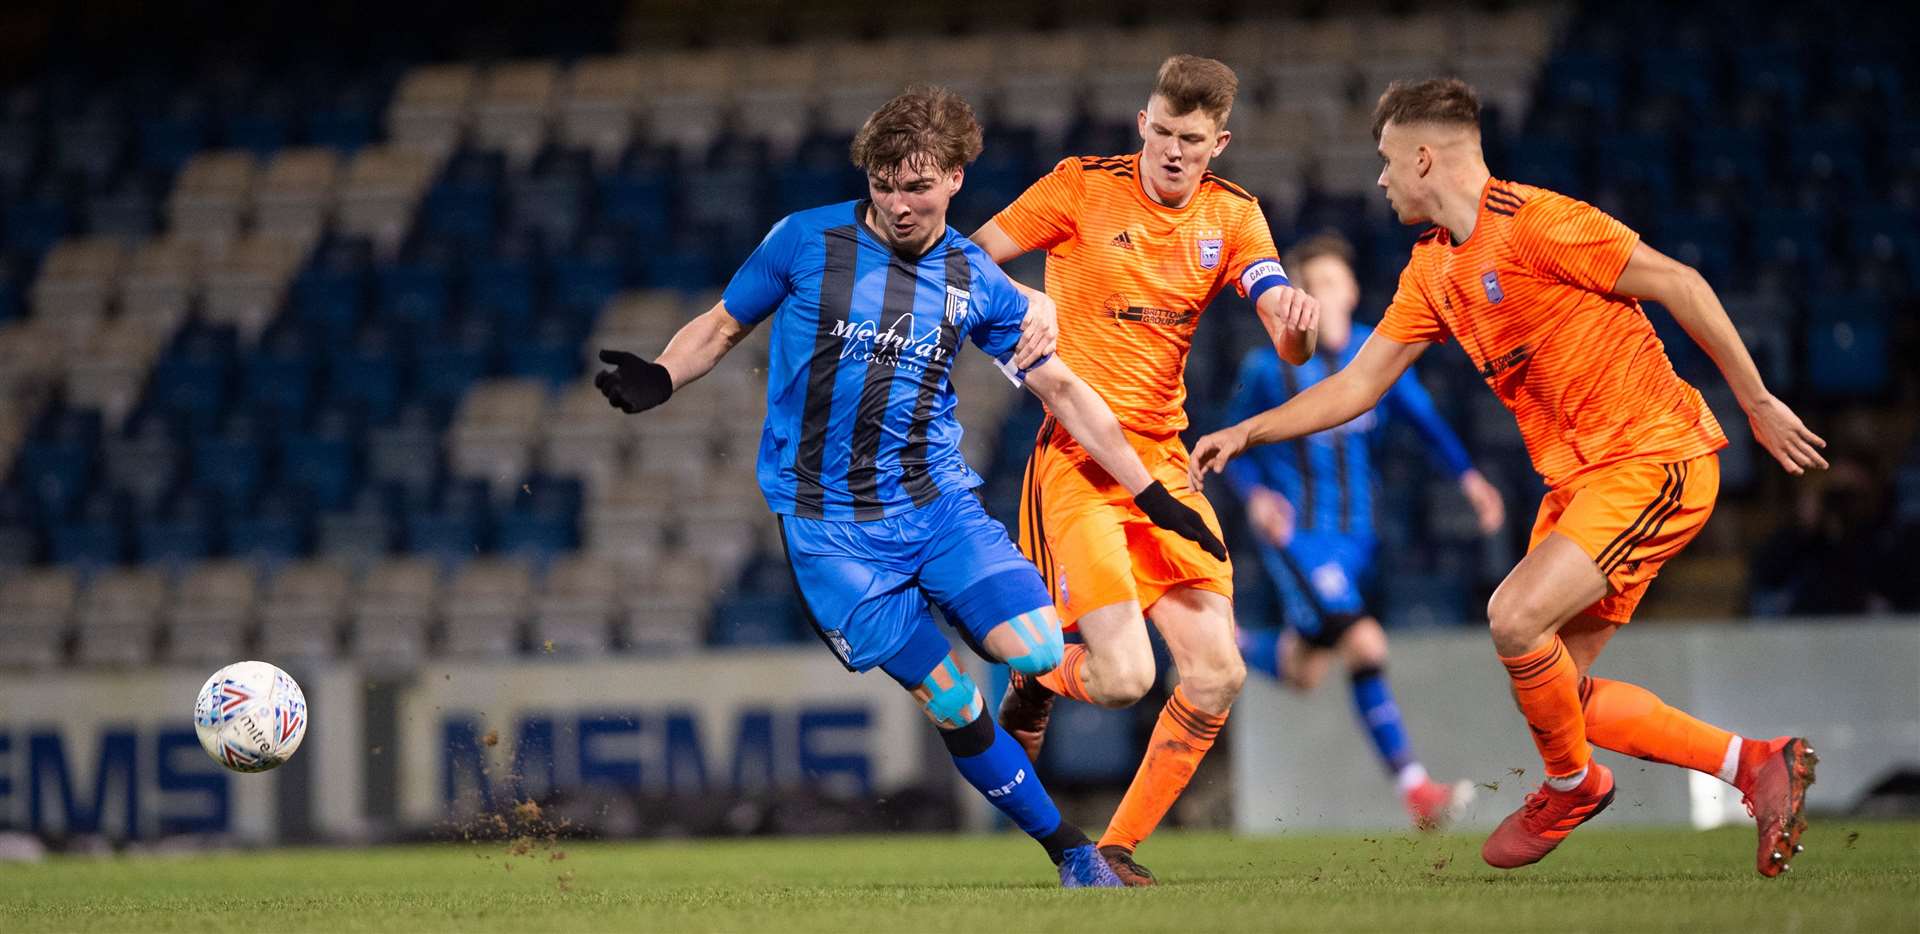 Roman Campbell in FA Youth Cup action for Gillingham at Priestfield. He has joined Faversham Town Picture: Ady Kerry